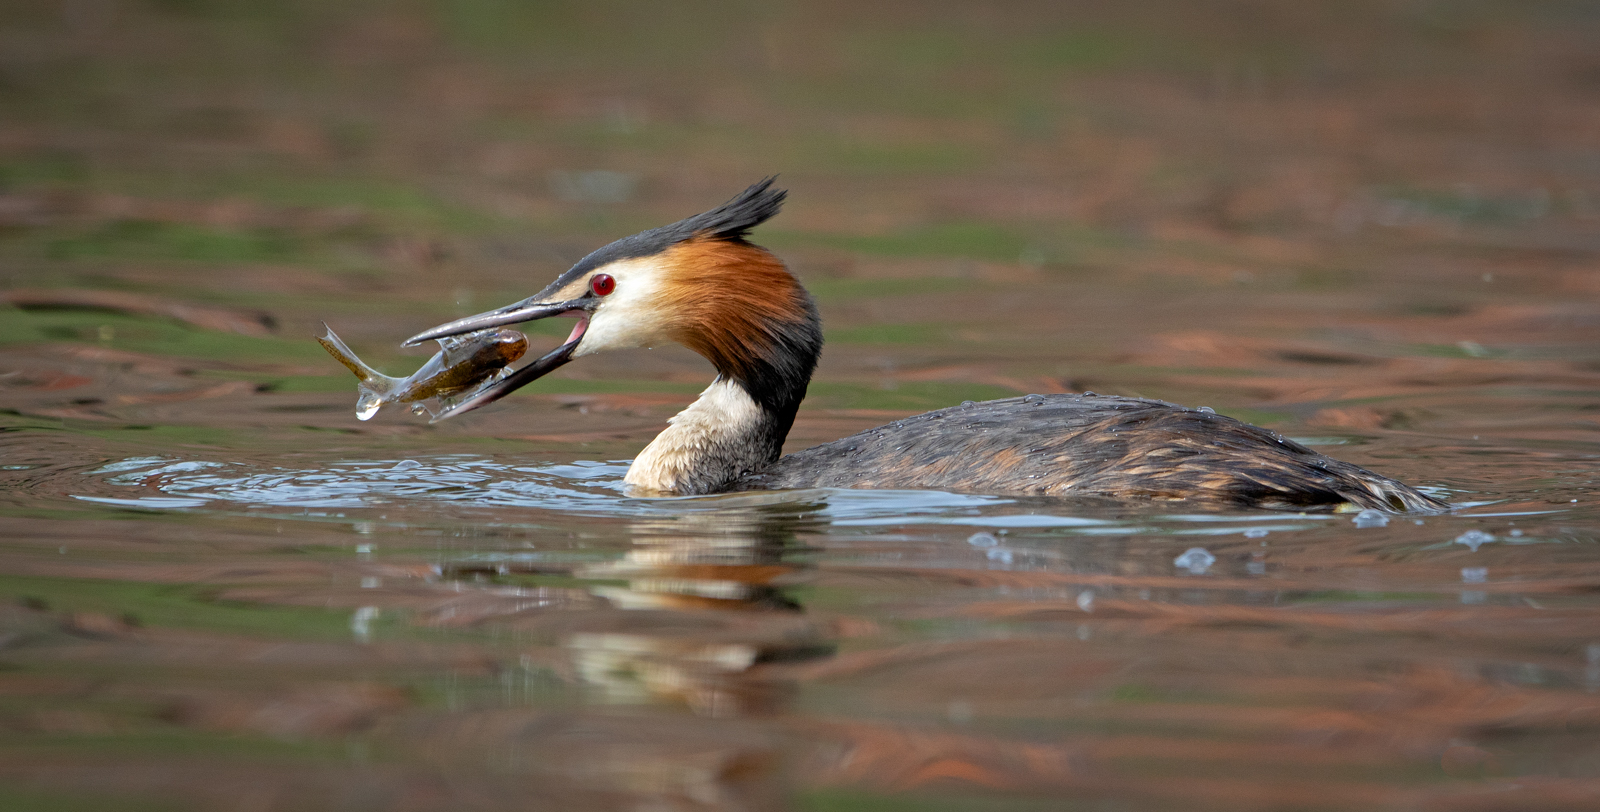 Great_Crested_Grebe_Turning_Fish.jpg